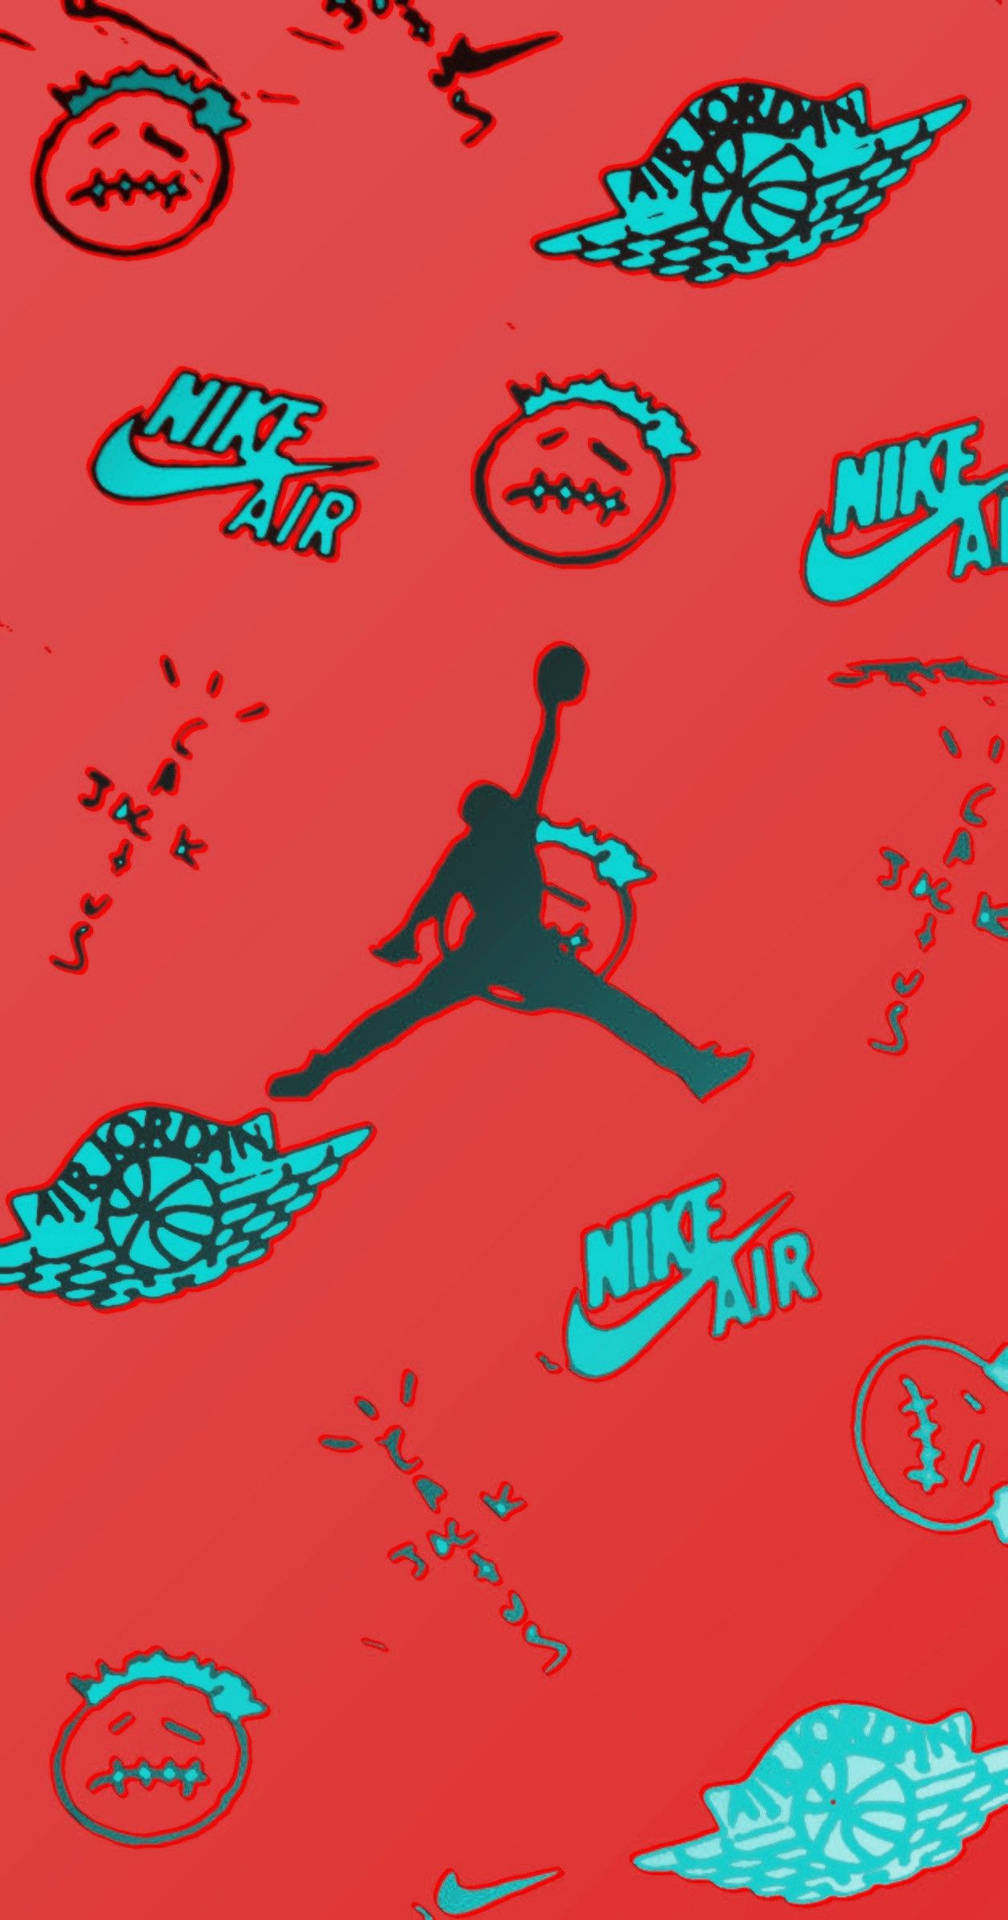 Hype Cactus Jack Nike Air Red Background